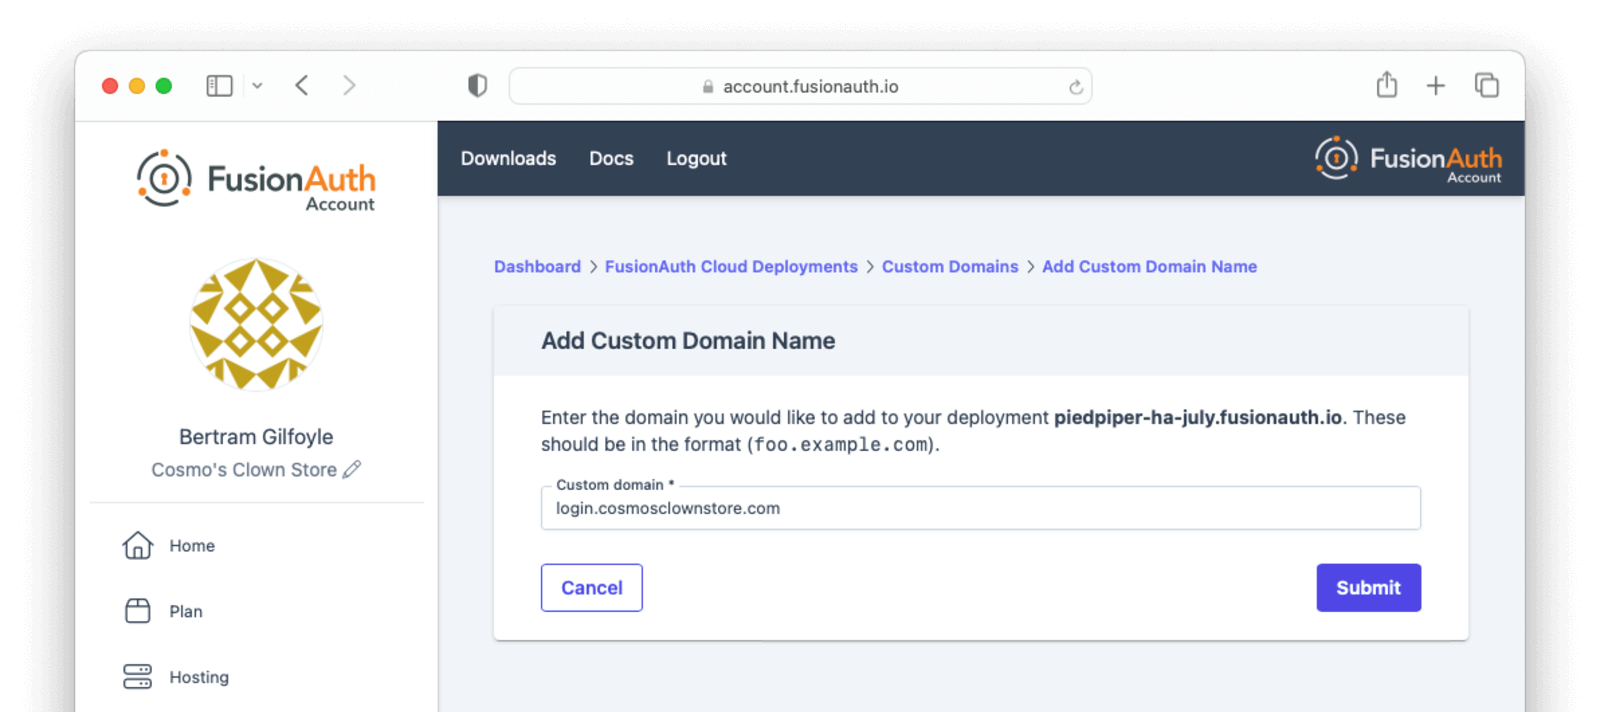 Form to add a custom domain.